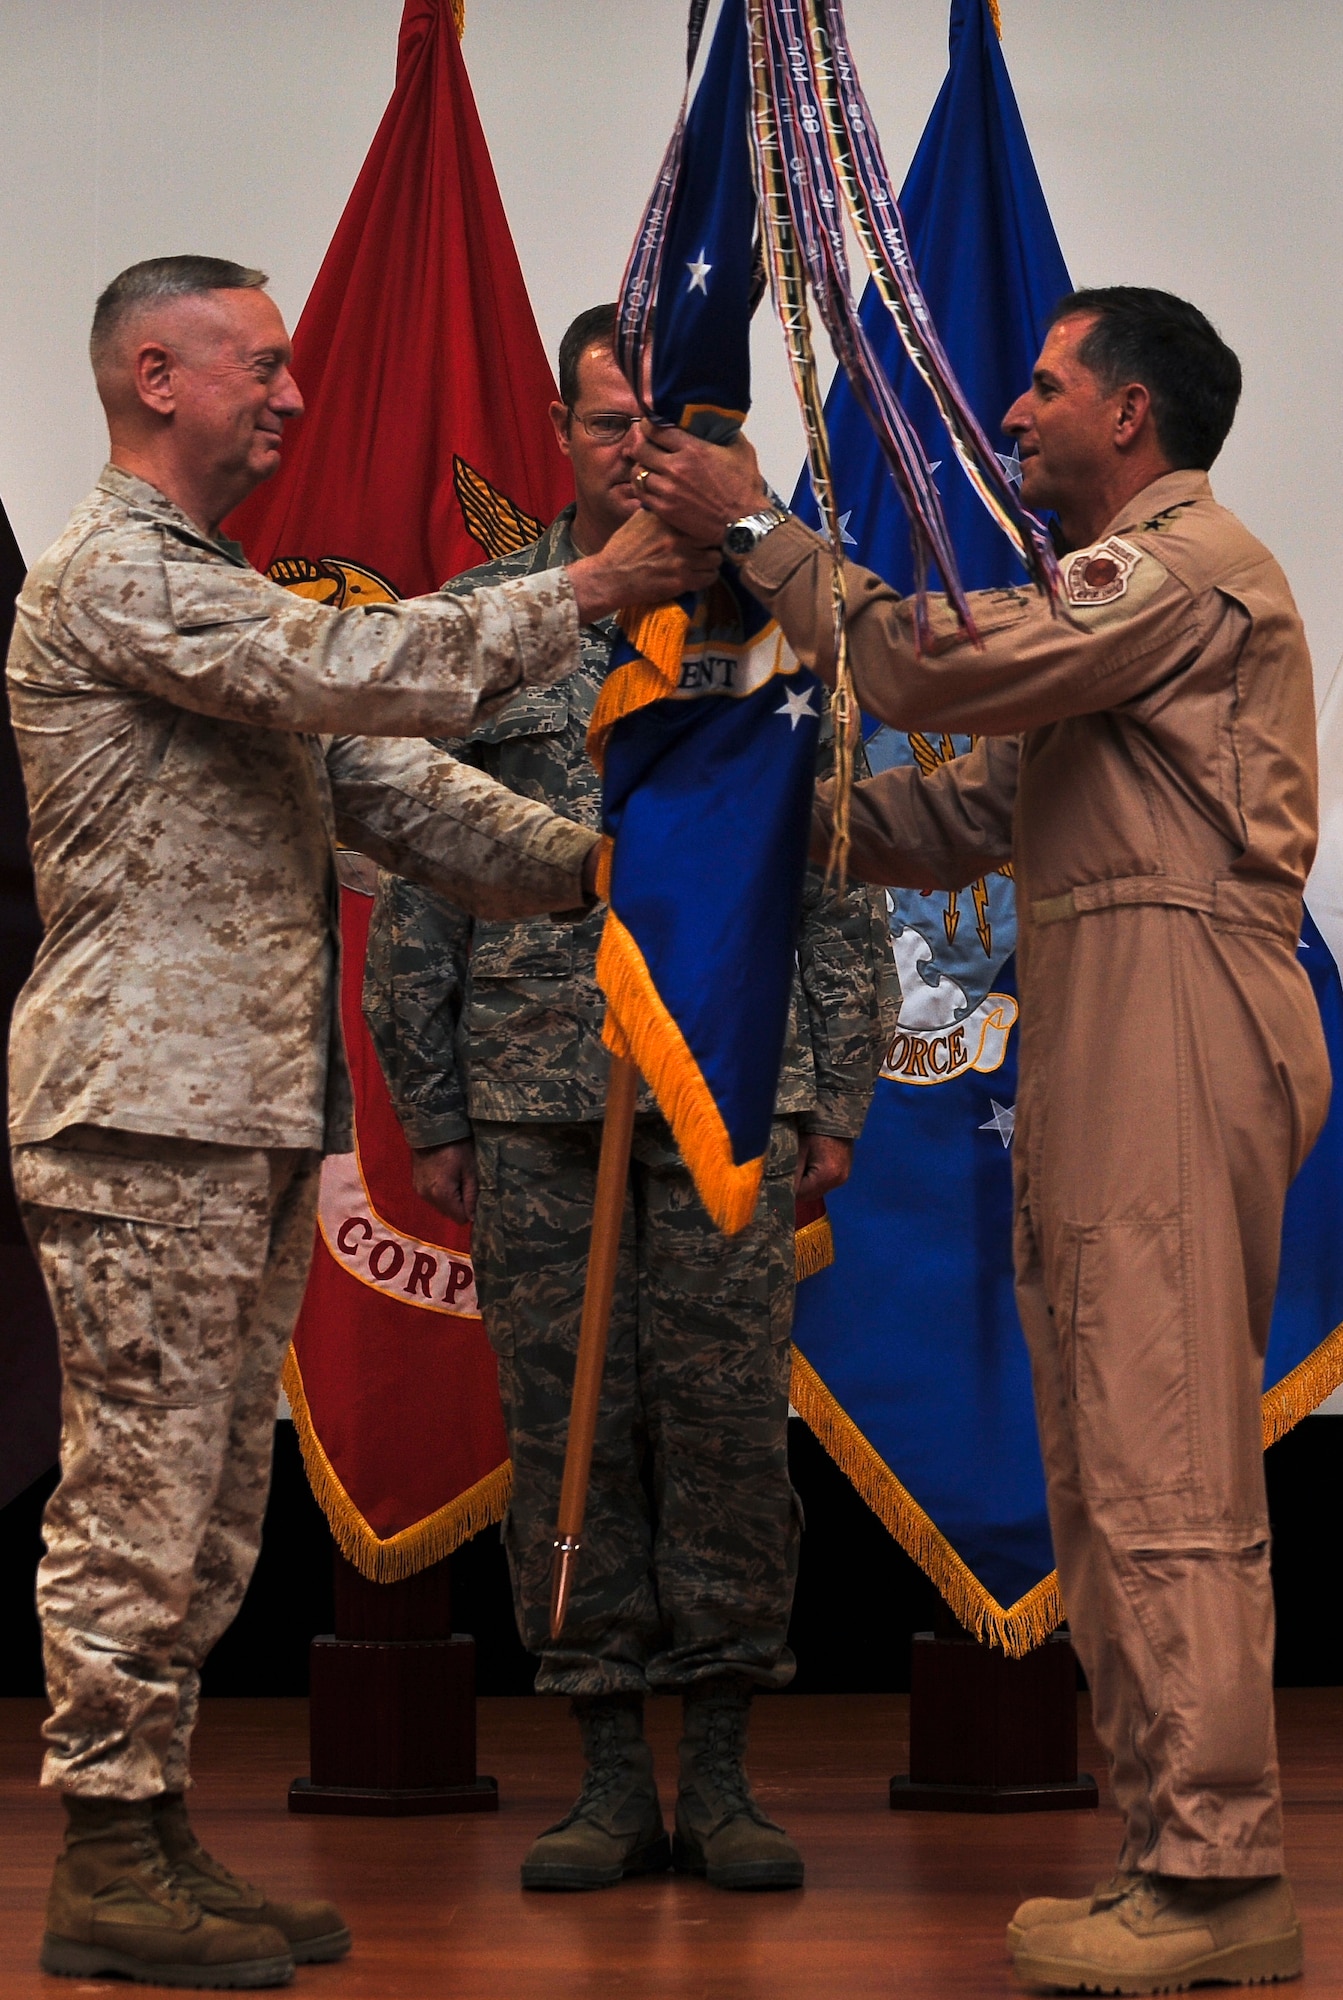 Marine Gen. James N. Mattis, commander of U.S. Central Command, passes the U.S. Air Forces Central Command guidon to Lt. Gen. David L. Goldfein at the USAFCENT change of command ceremony, Aug. 3, 2011, in Southwest Asia. (U.S. Air Force photo/Senior Airman Paul Labbe)